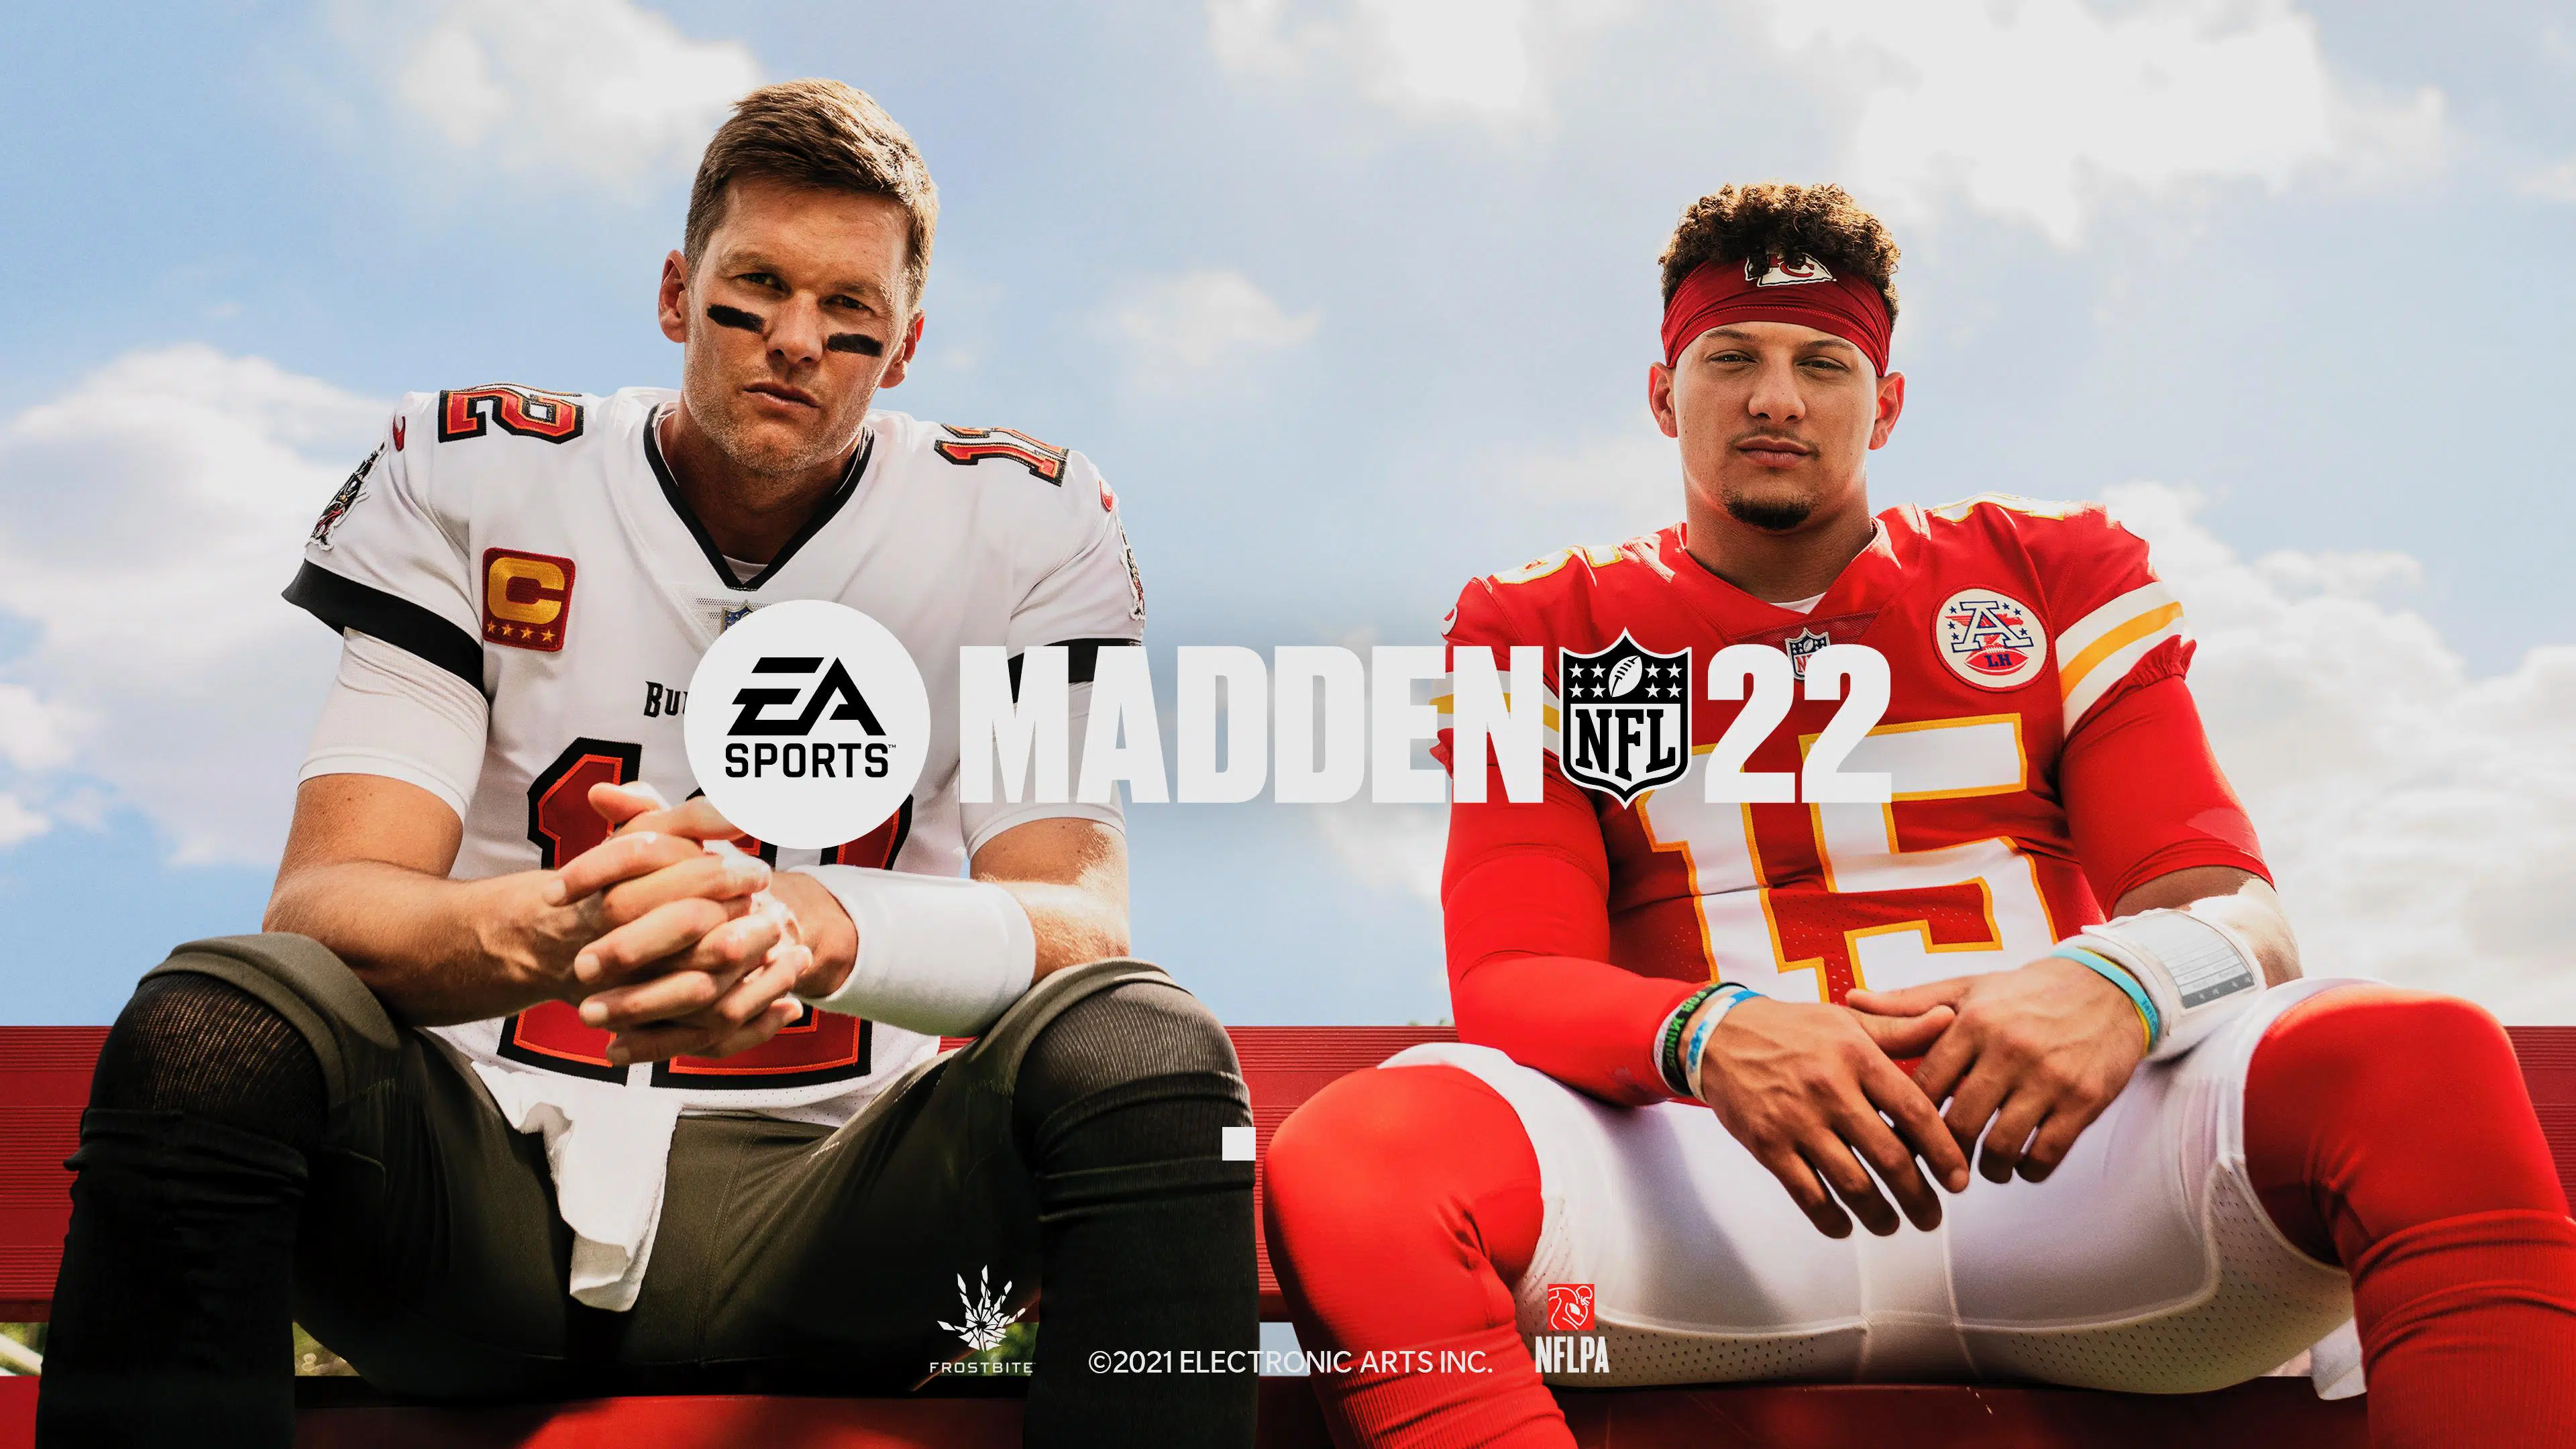 Vale a pena, Madden NFL 22?